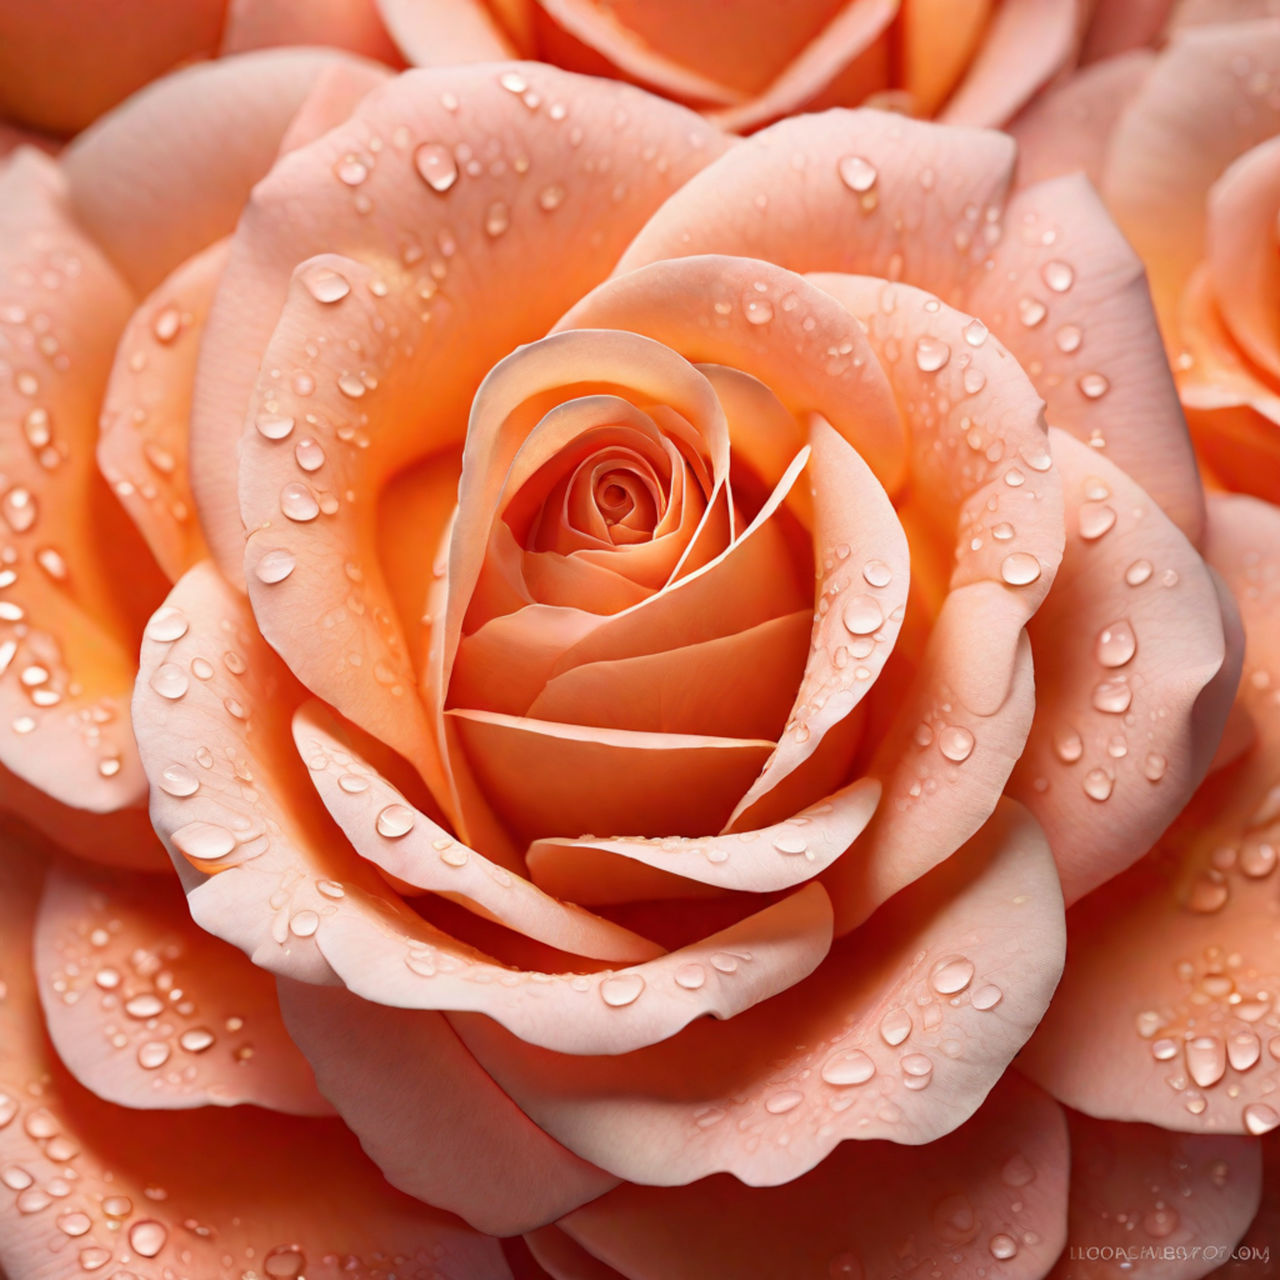 flower, beauty in nature, drop, rose, flowering plant, wet, pink, water, freshness, petal, plant, close-up, flower head, fragility, nature, inflorescence, dew, peach, macro photography, garden roses, no people, full frame, growth, orange color, backgrounds, red, orange, macro, extreme close-up, outdoors